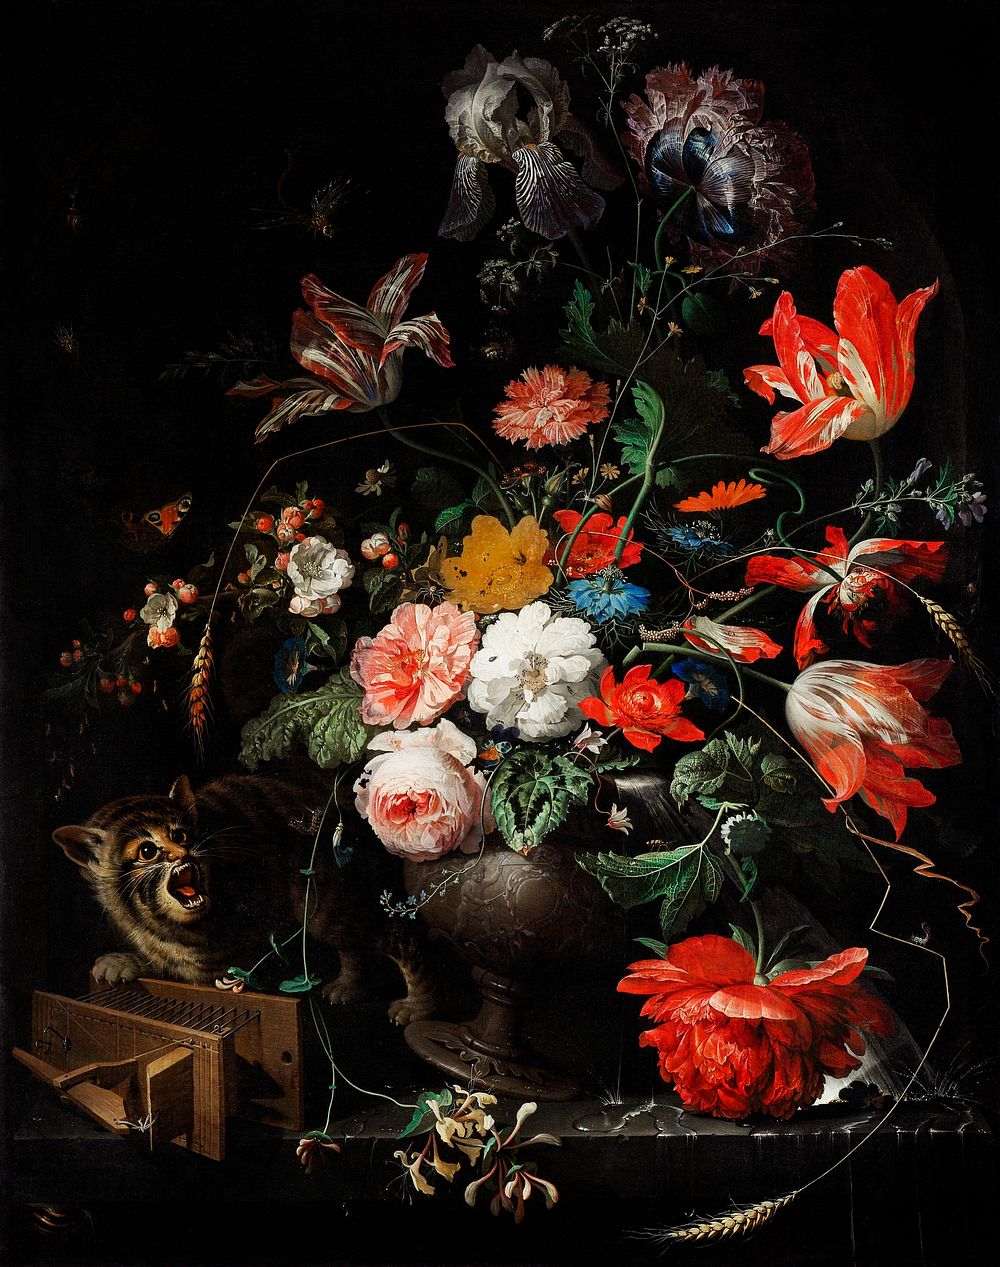 The Overturned Bouquet by Abraham Mignon (1660-1679). Original from The Rijksmuseum. Digitally enhanced by rawpixel.